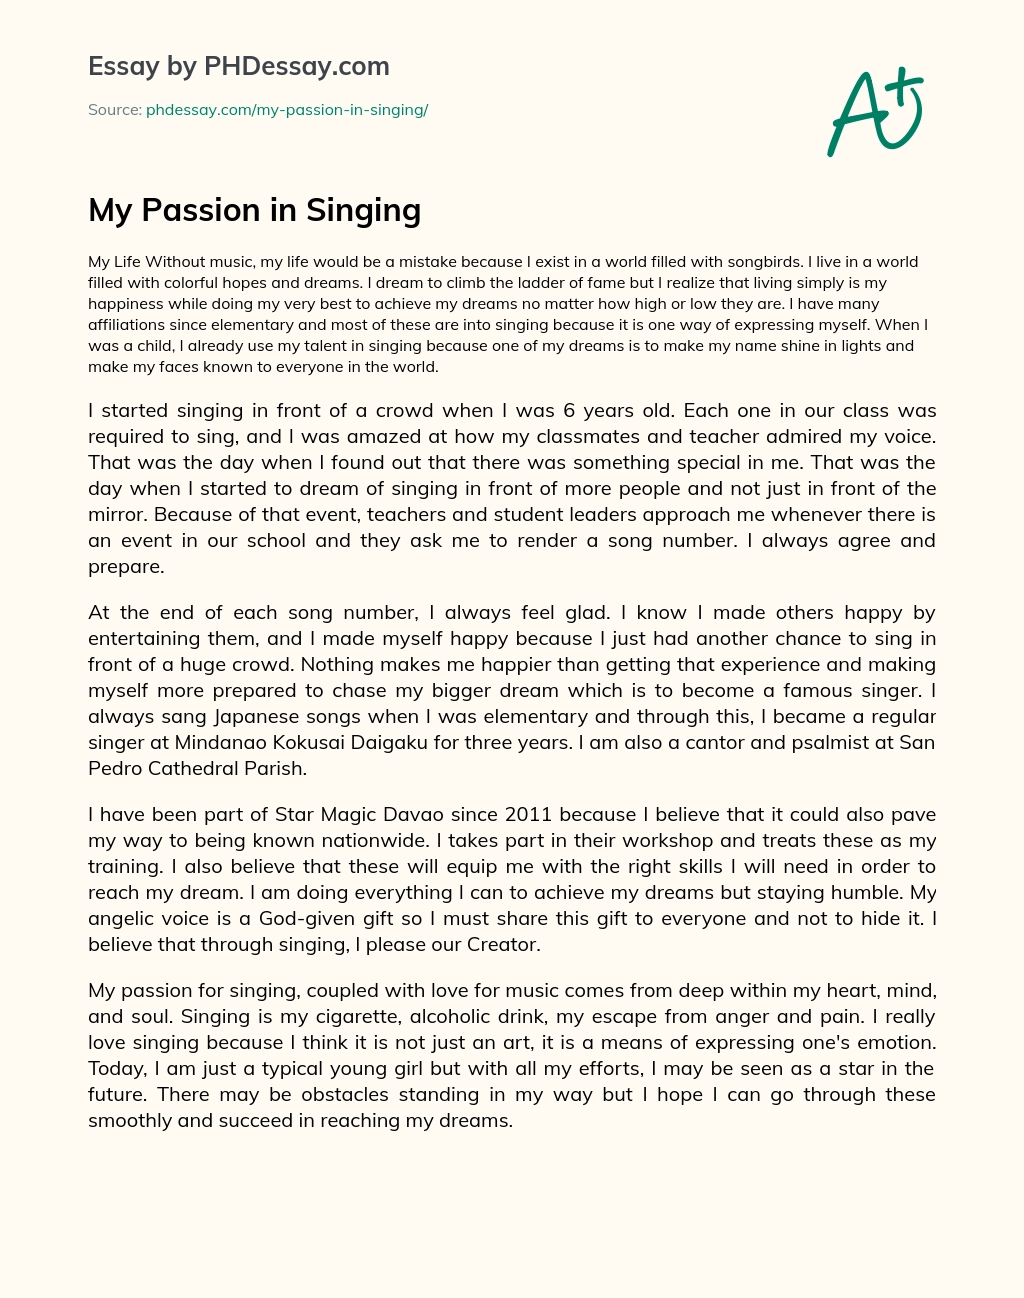 My Passion in Singing essay